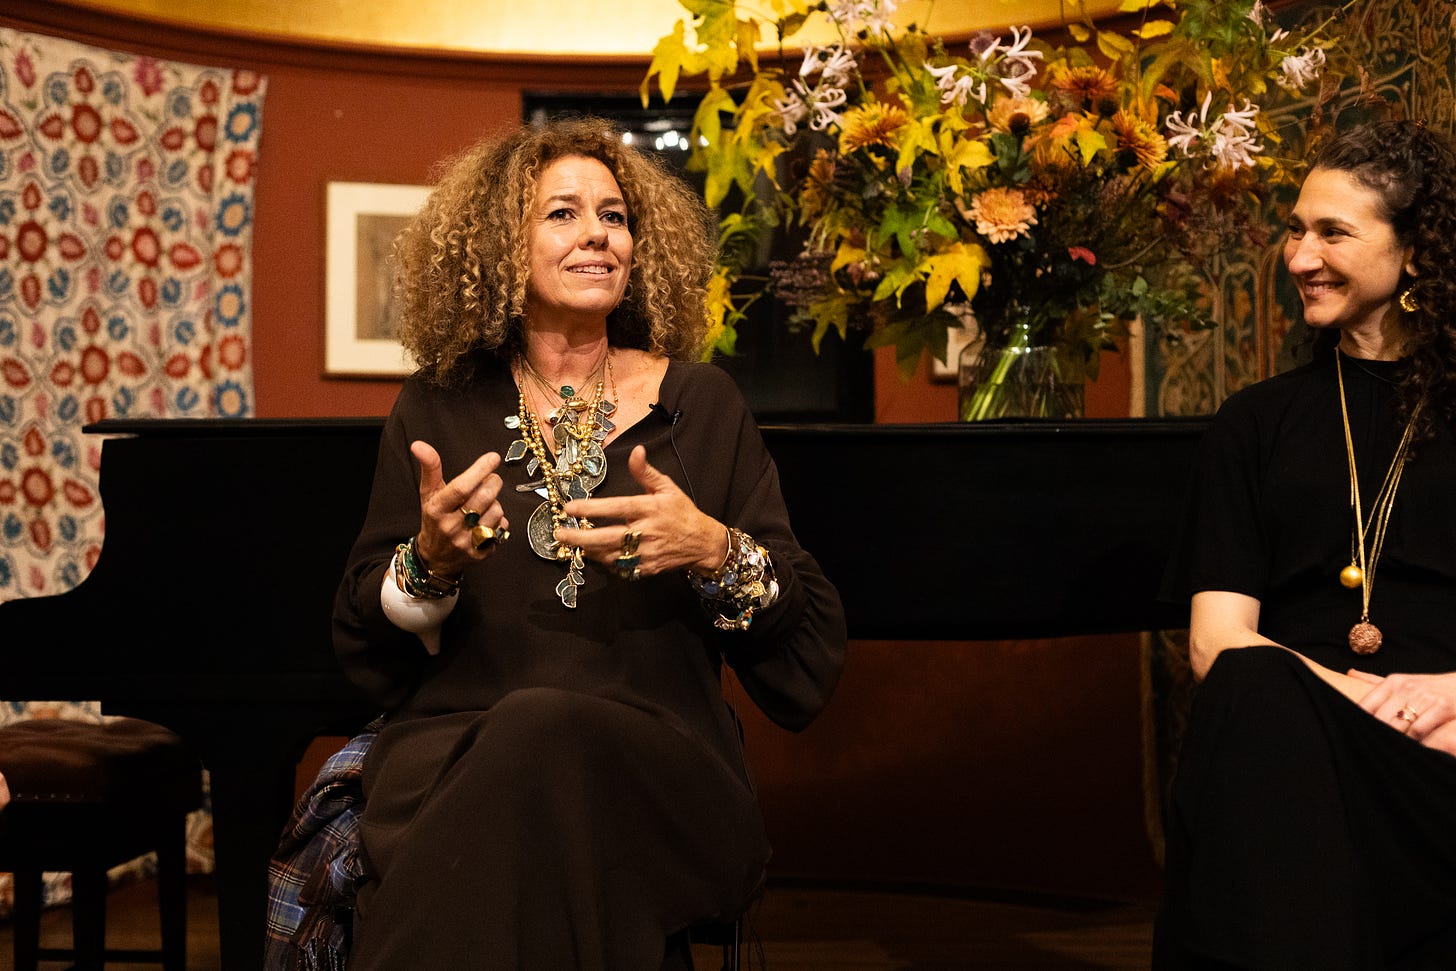 Conscious jeweller Pippa Small on stage with Shoshanna Stewart, president of Turquoise Mountain